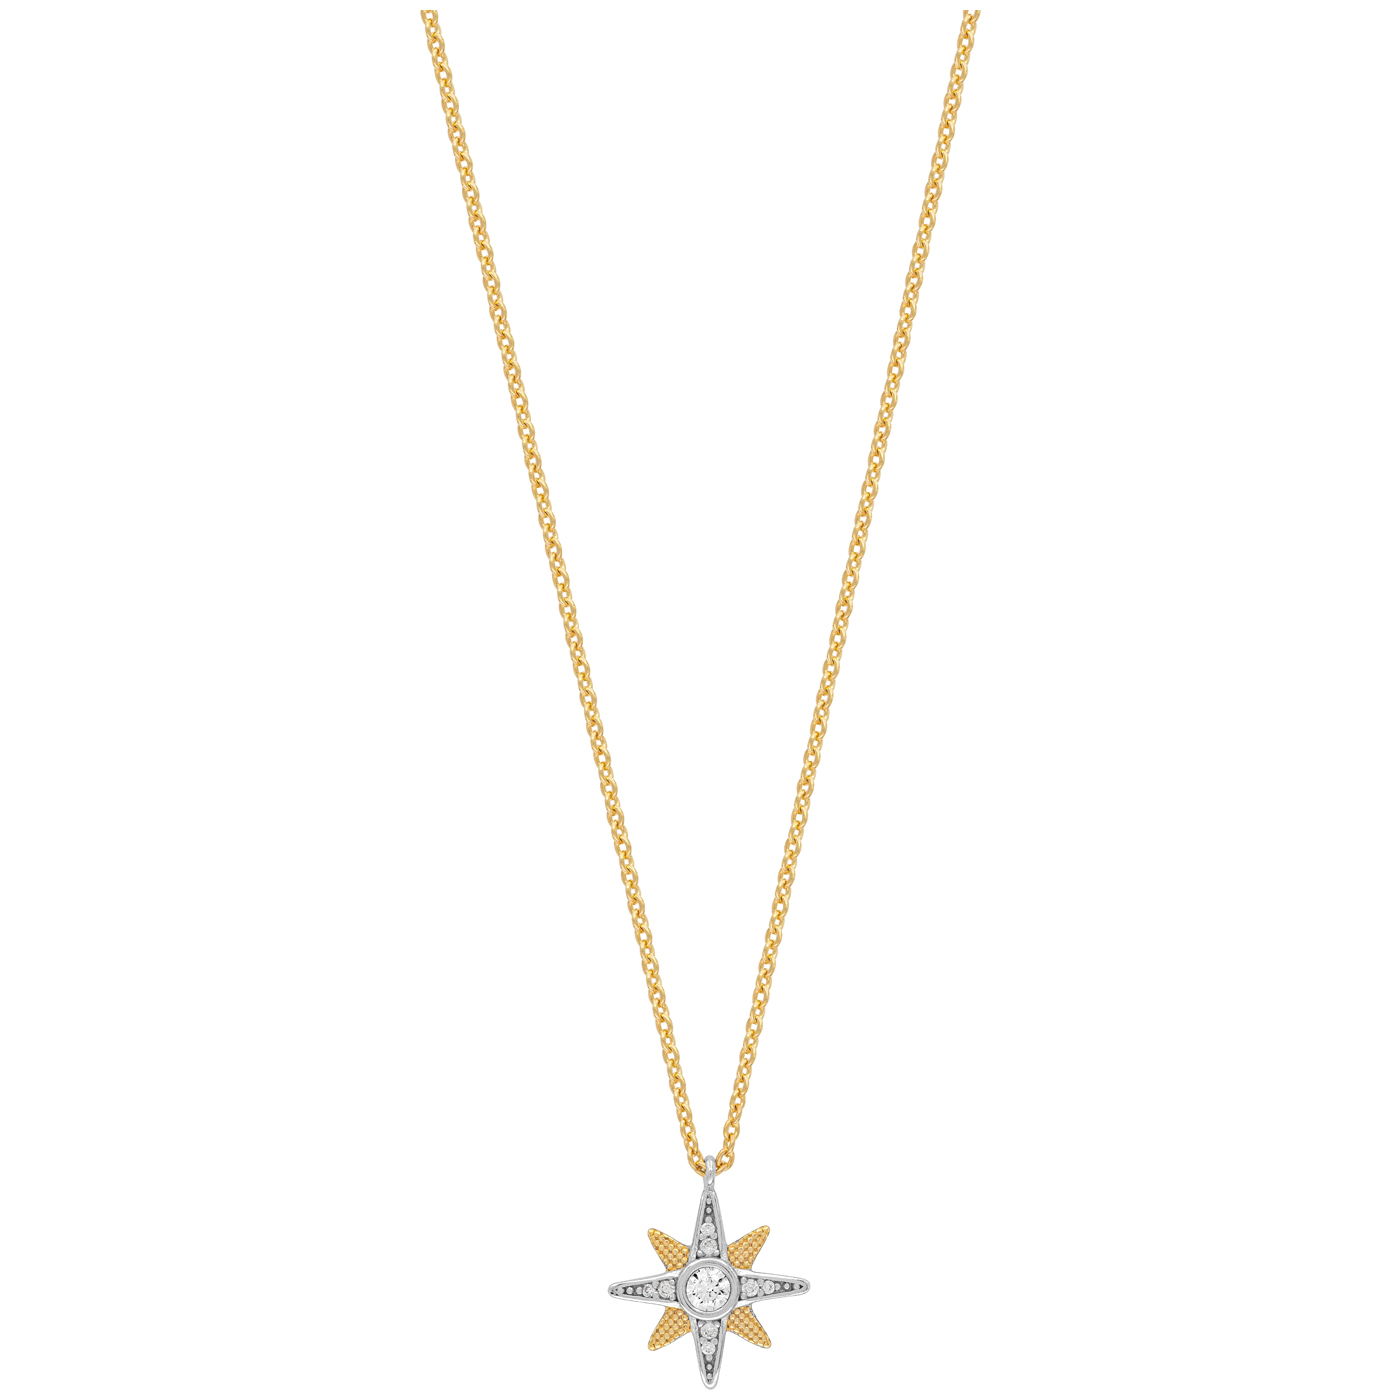 Engelsrufer Necklace star 925 silver gold plated zirconia